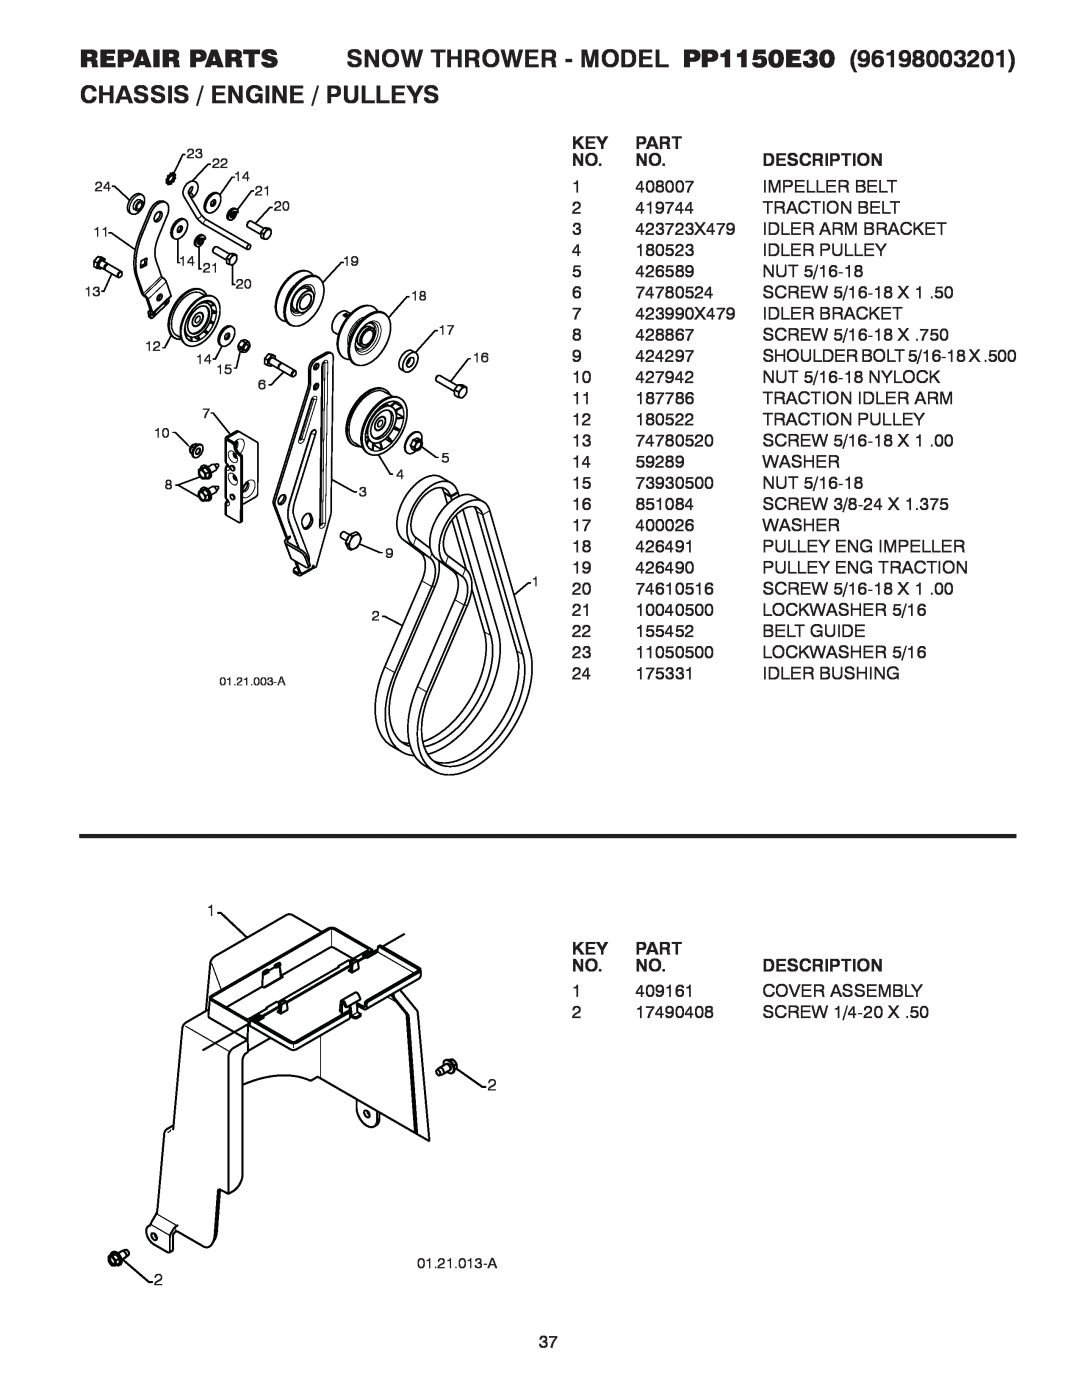 Poulan owner manual REPAIR PARTS SNOW THROWER - MODEL PP1150E30, Chassis / Engine / Pulleys, Part, Description 